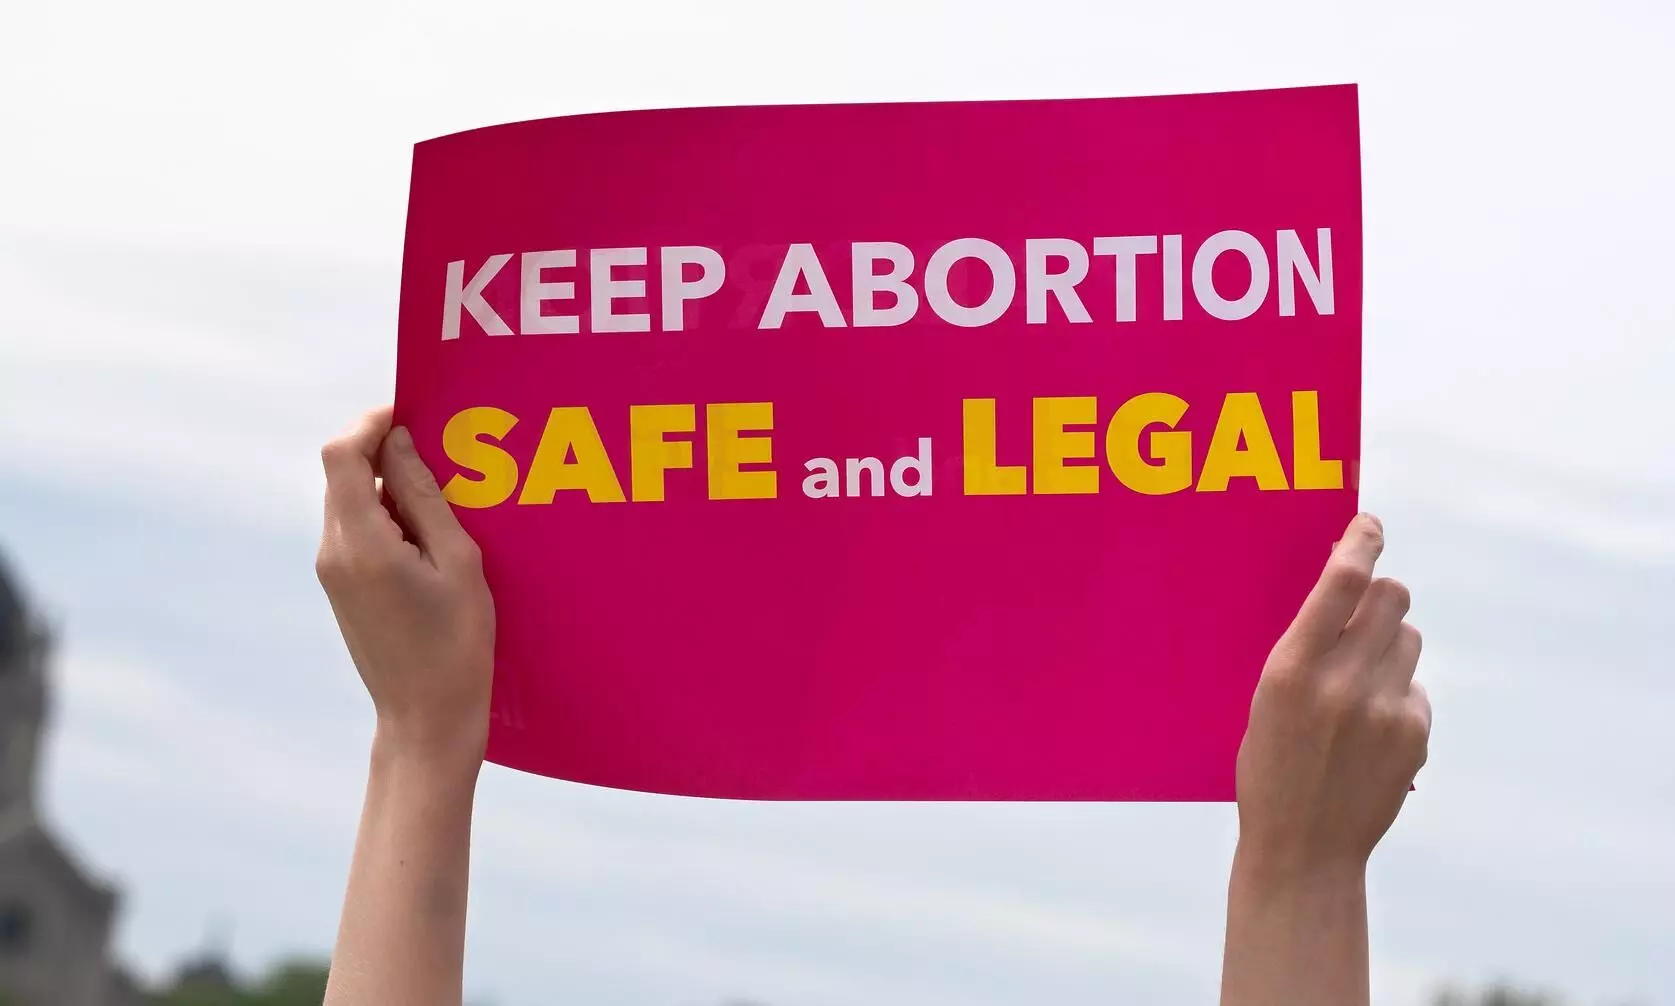 Marital status as a criterion for abortion is unconstitutional, all women can seek safe, legal abortion: SC rules